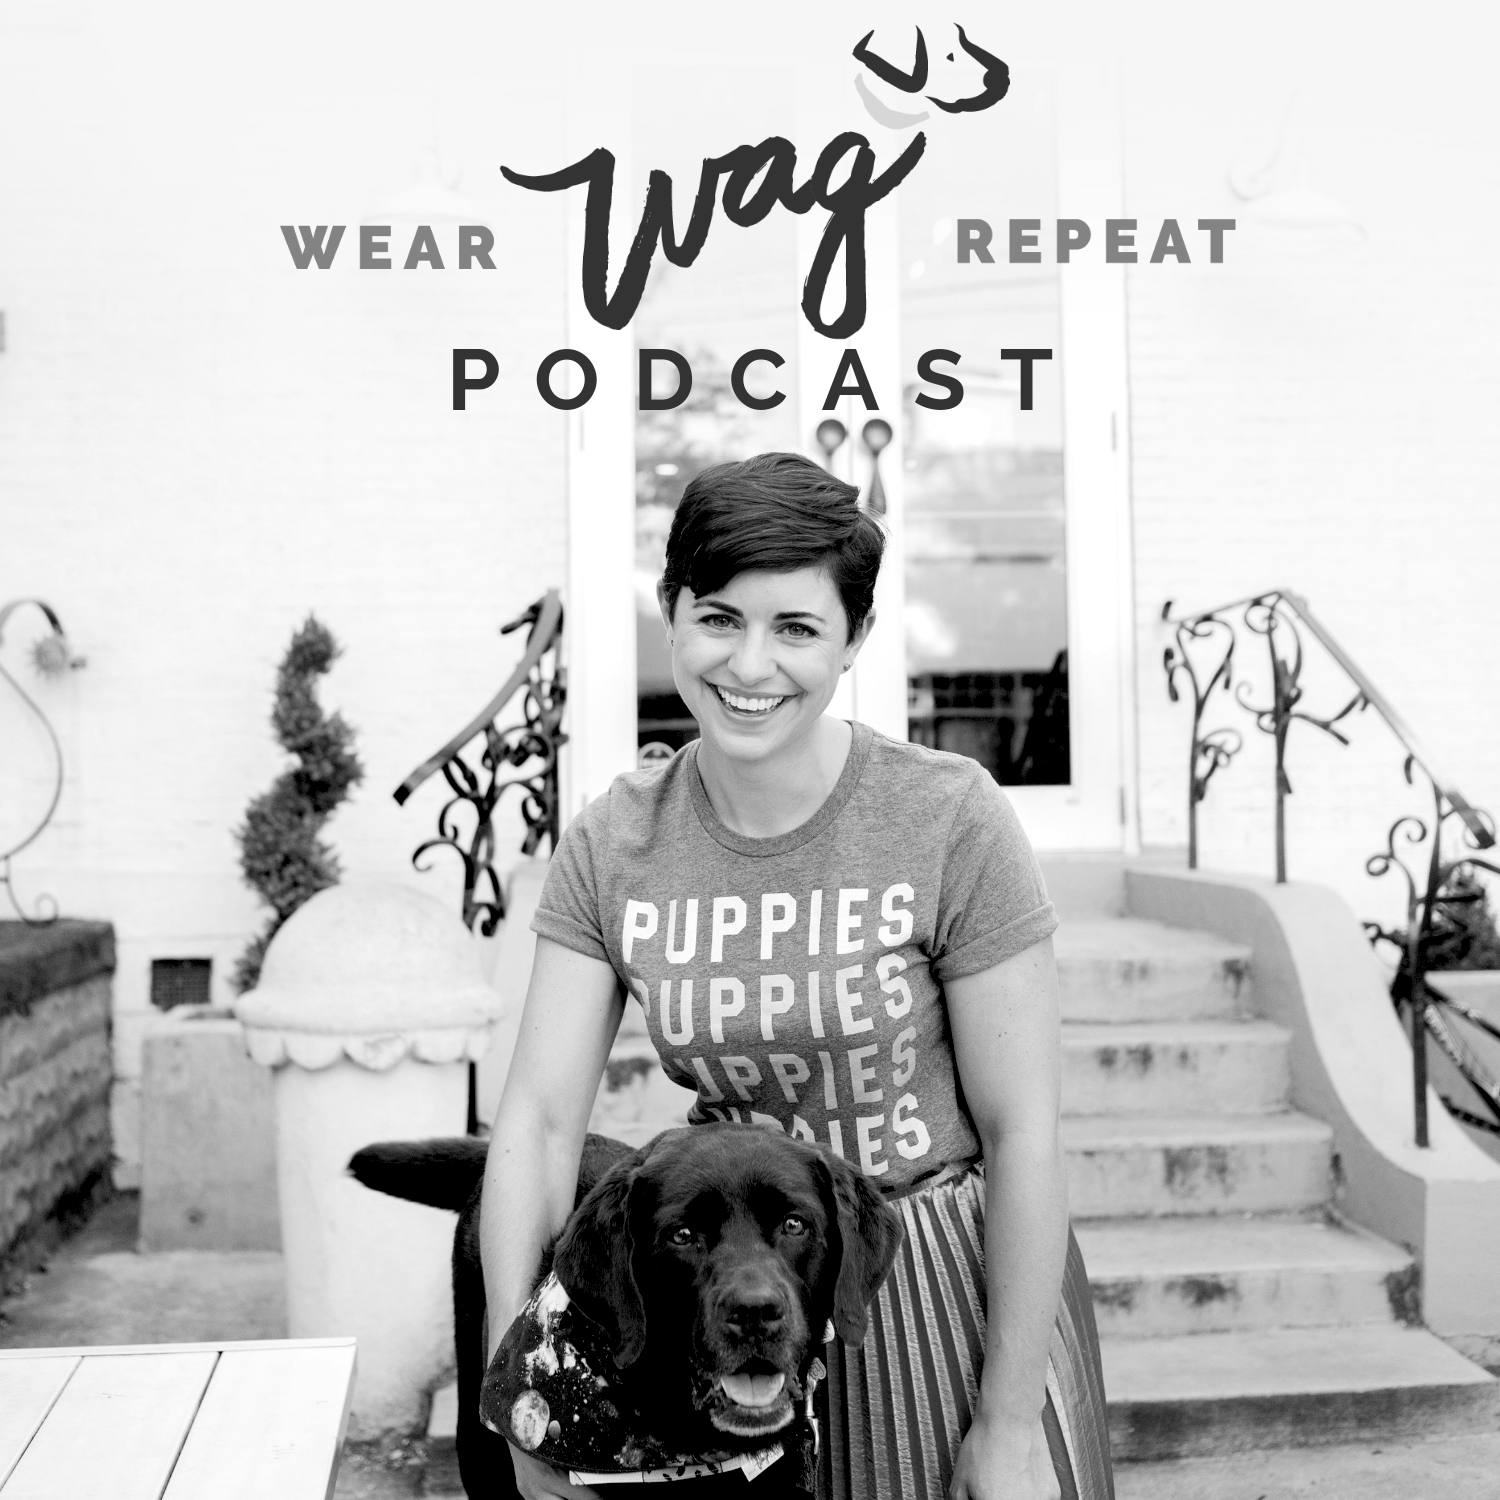 Wear Wag Repeat Podcast Cover.png